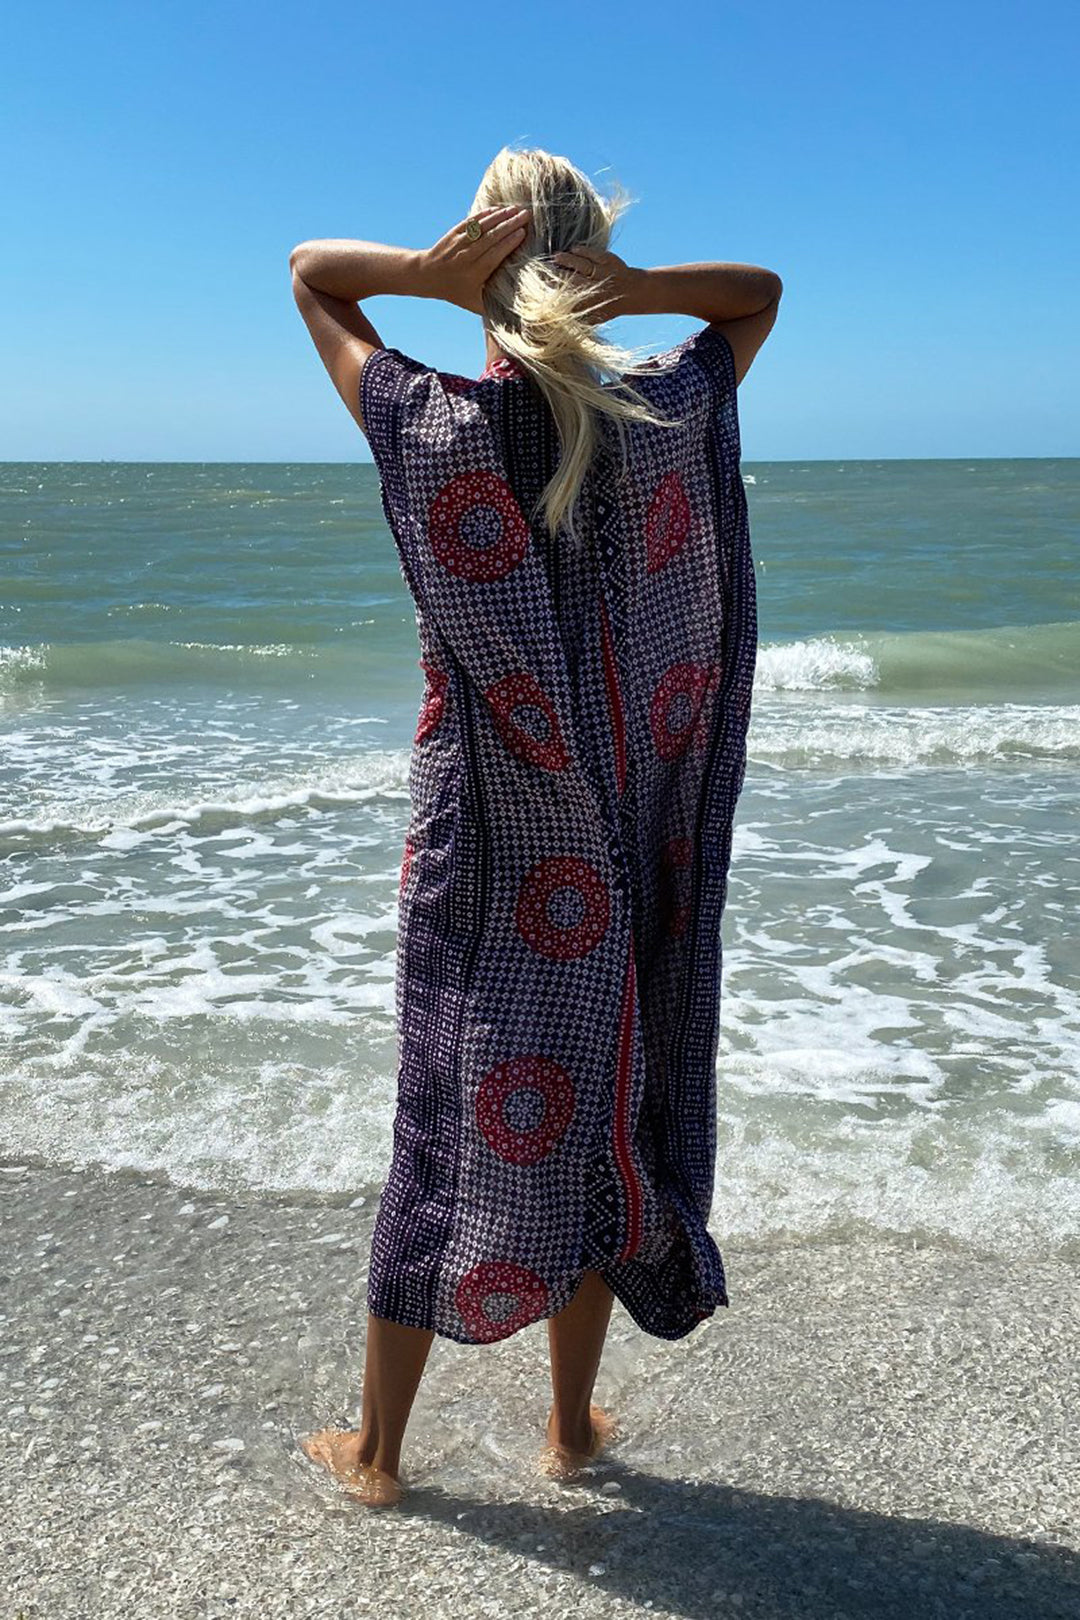 At the beach in the Emerson Fry Emerson Caftan beach cover-up in Butterfly Organic red and purple print at Inner Beach Co, Toronto, Canada